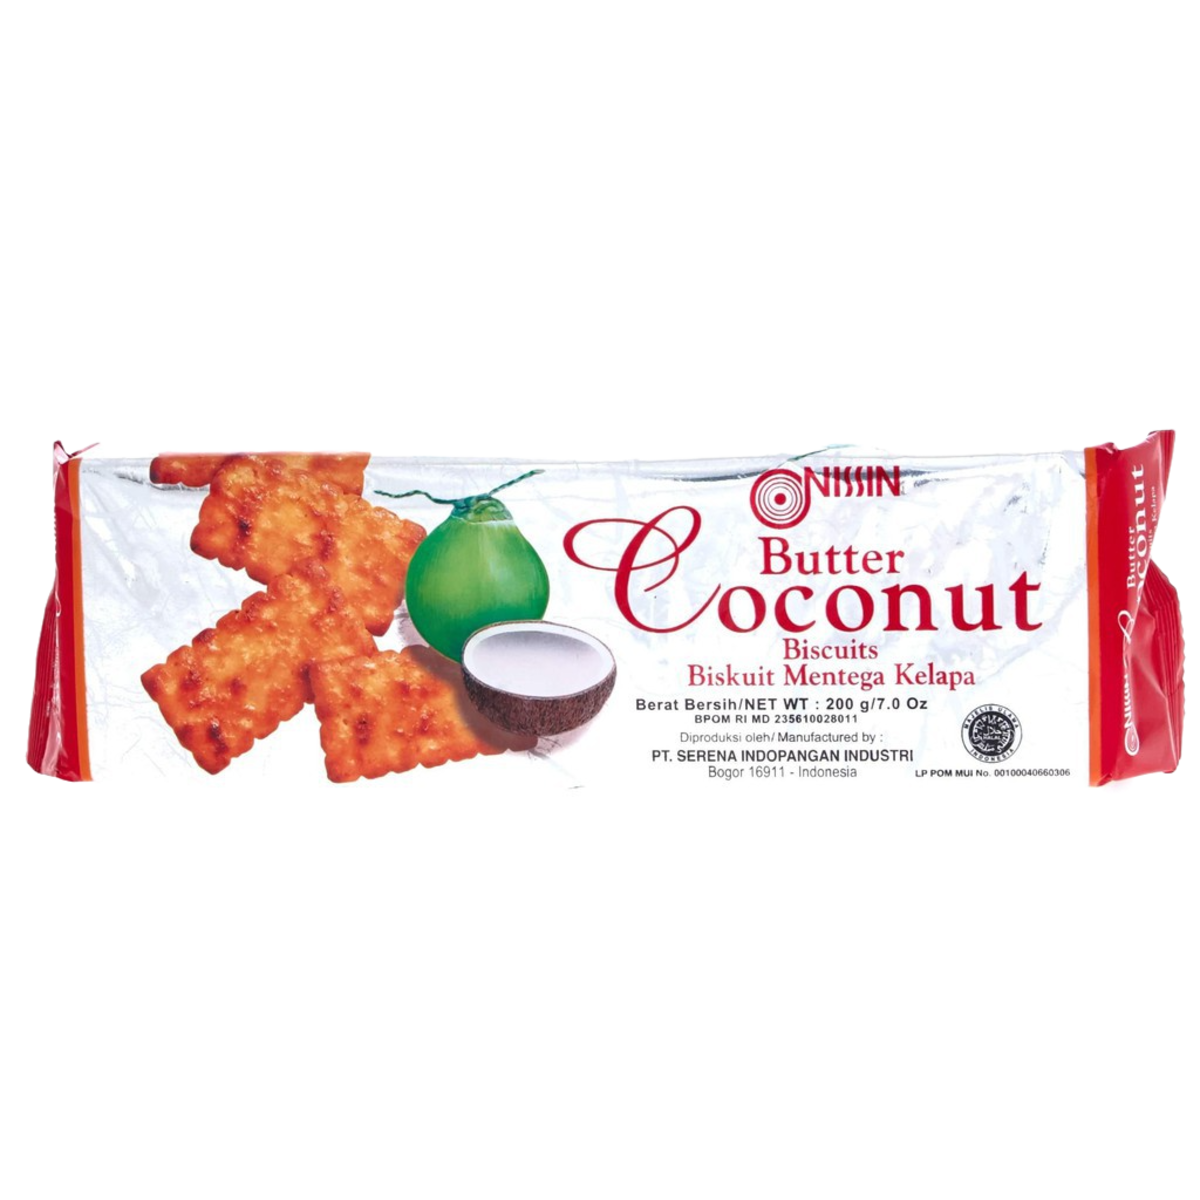 Nissin Butter Coconut Biscuit 200g